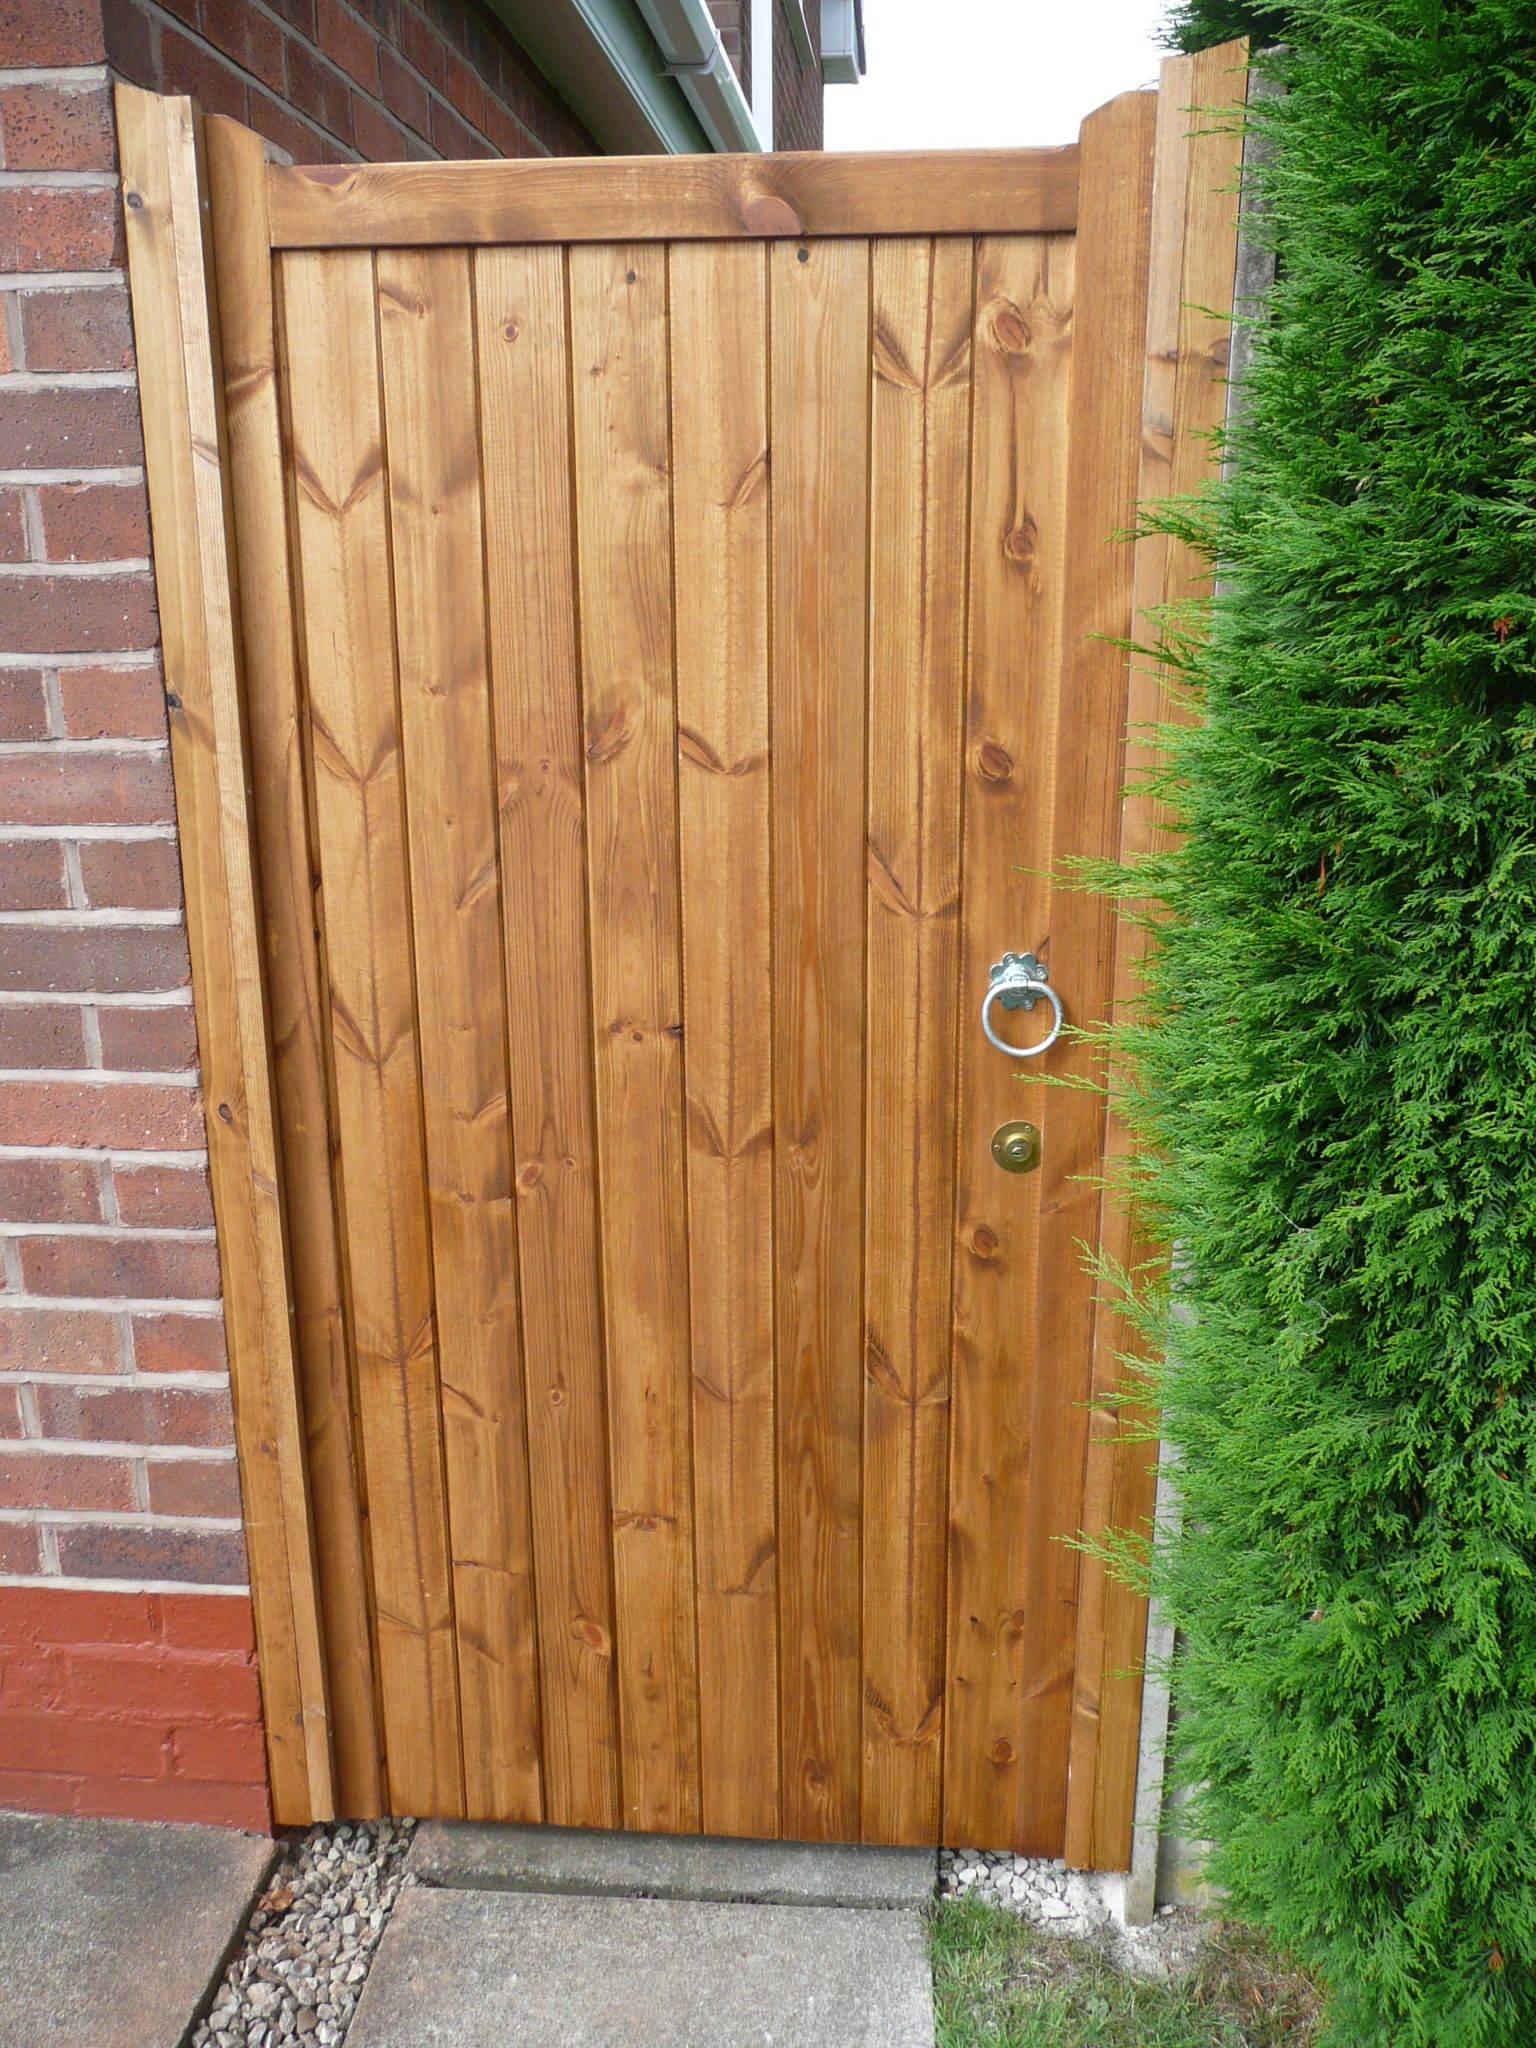 The Home Wood Fence Gates